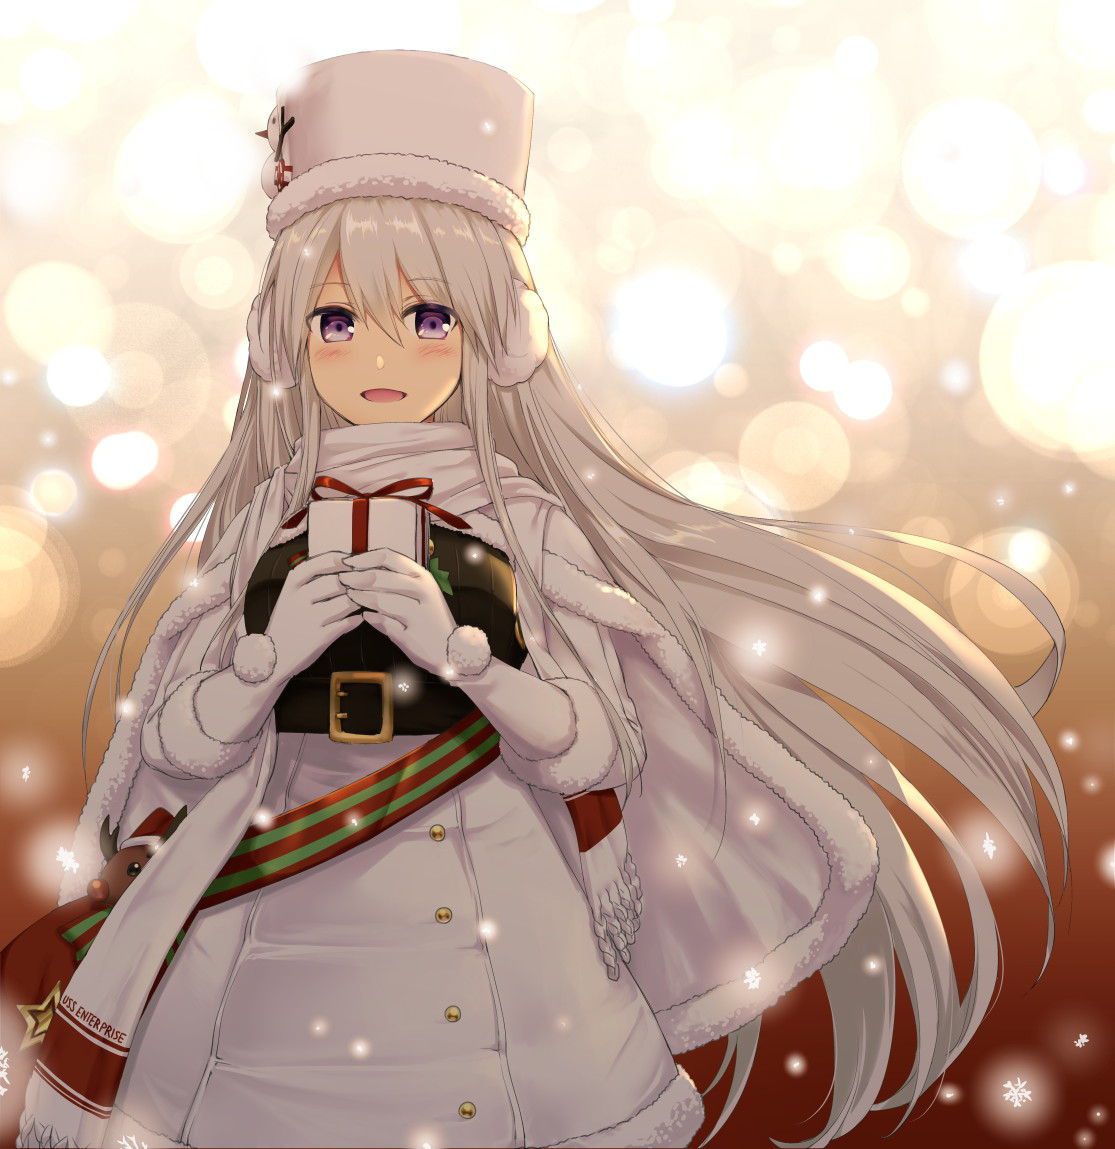 Gather people who want to see the erotic images of Azur Lane! 8